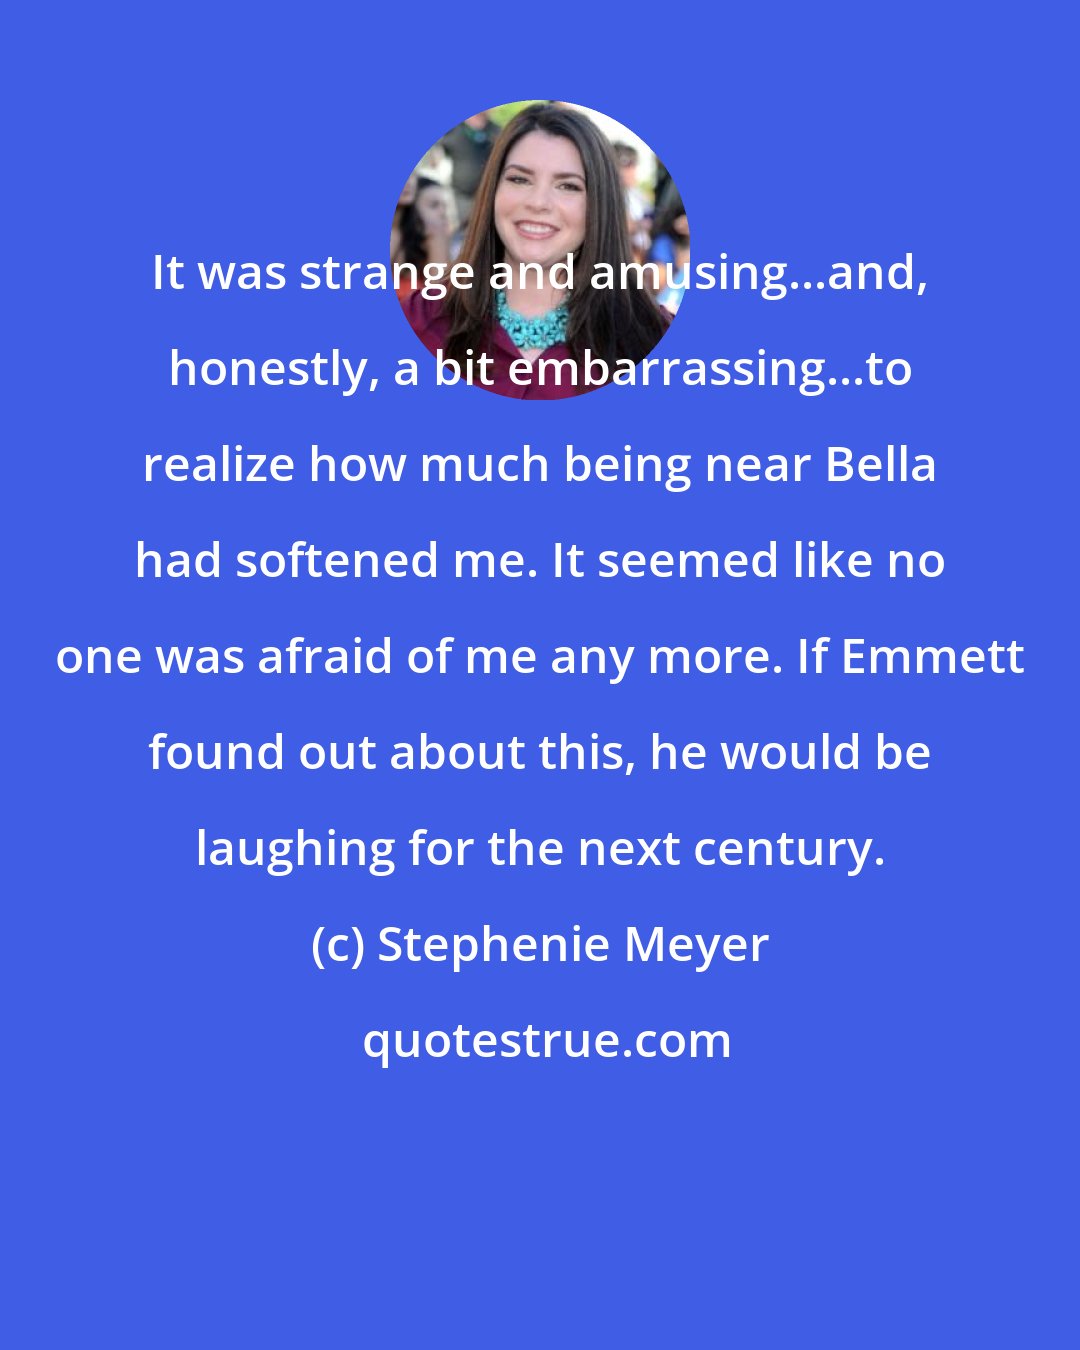 Stephenie Meyer: It was strange and amusing...and, honestly, a bit embarrassing...to realize how much being near Bella had softened me. It seemed like no one was afraid of me any more. If Emmett found out about this, he would be laughing for the next century.